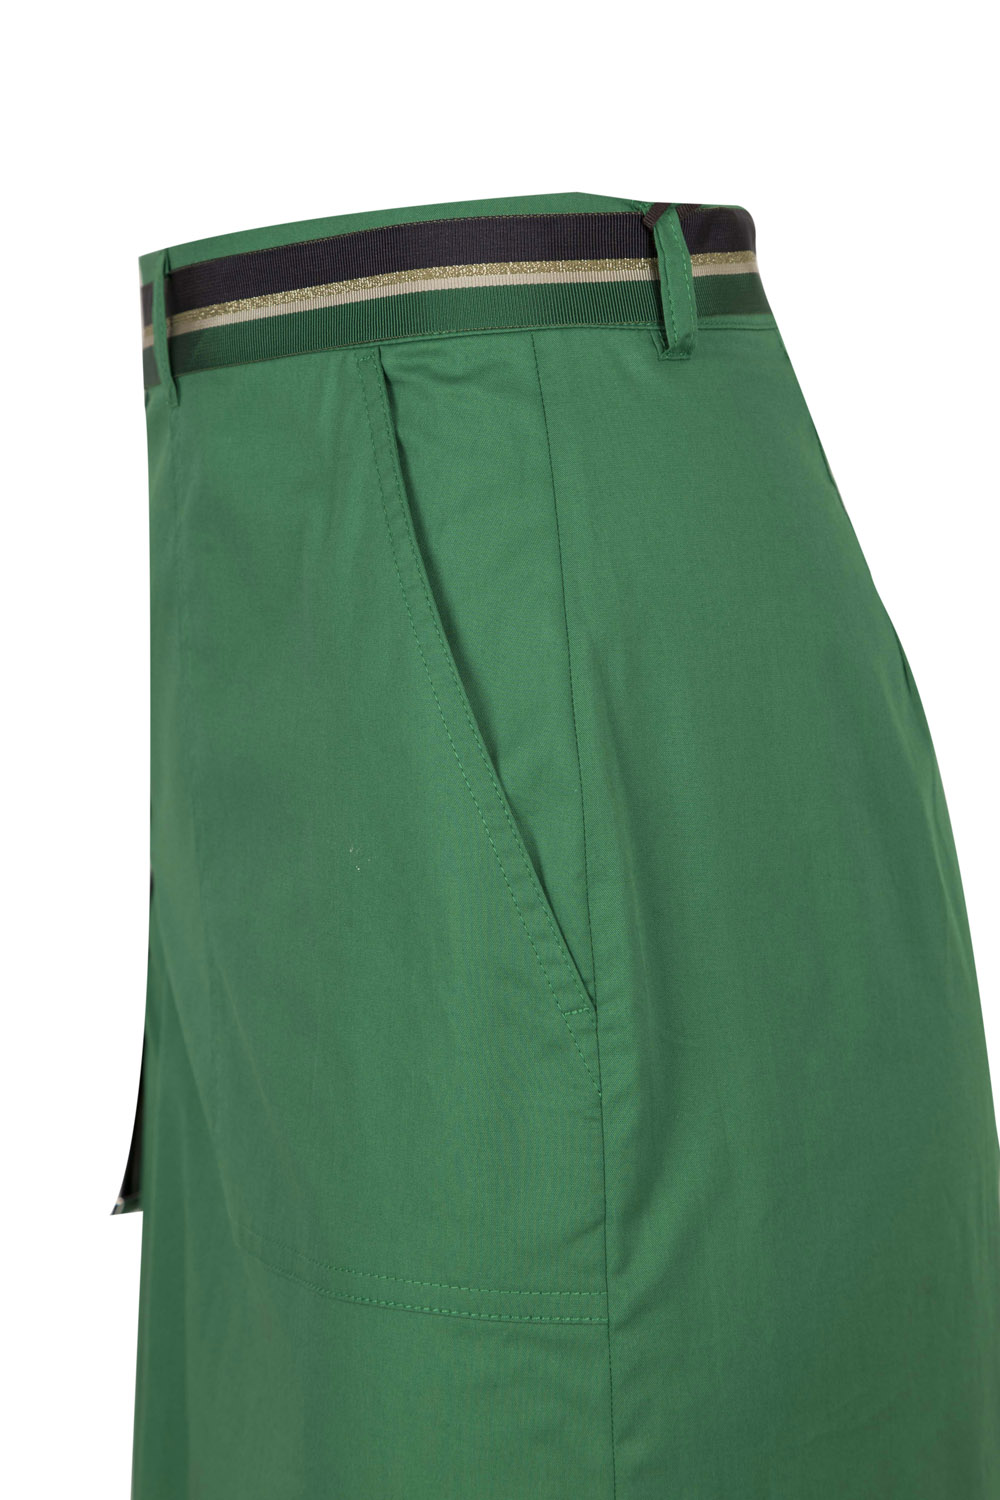 Utility Style “Jupe Culotte” with Matching Striped Belt